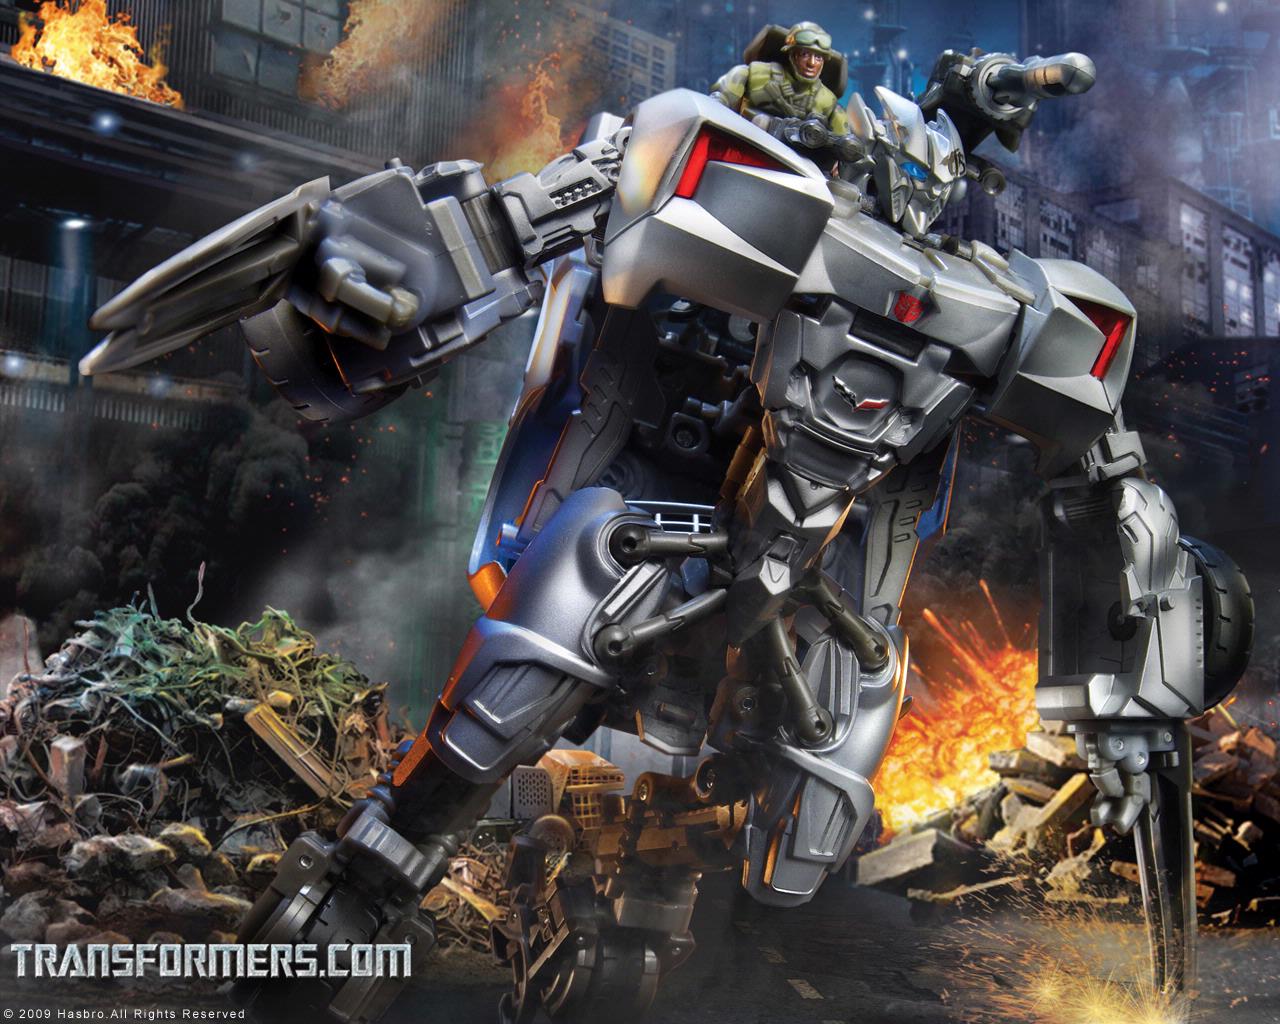 Hasbro Website Updated with print ads for Devastator and Human